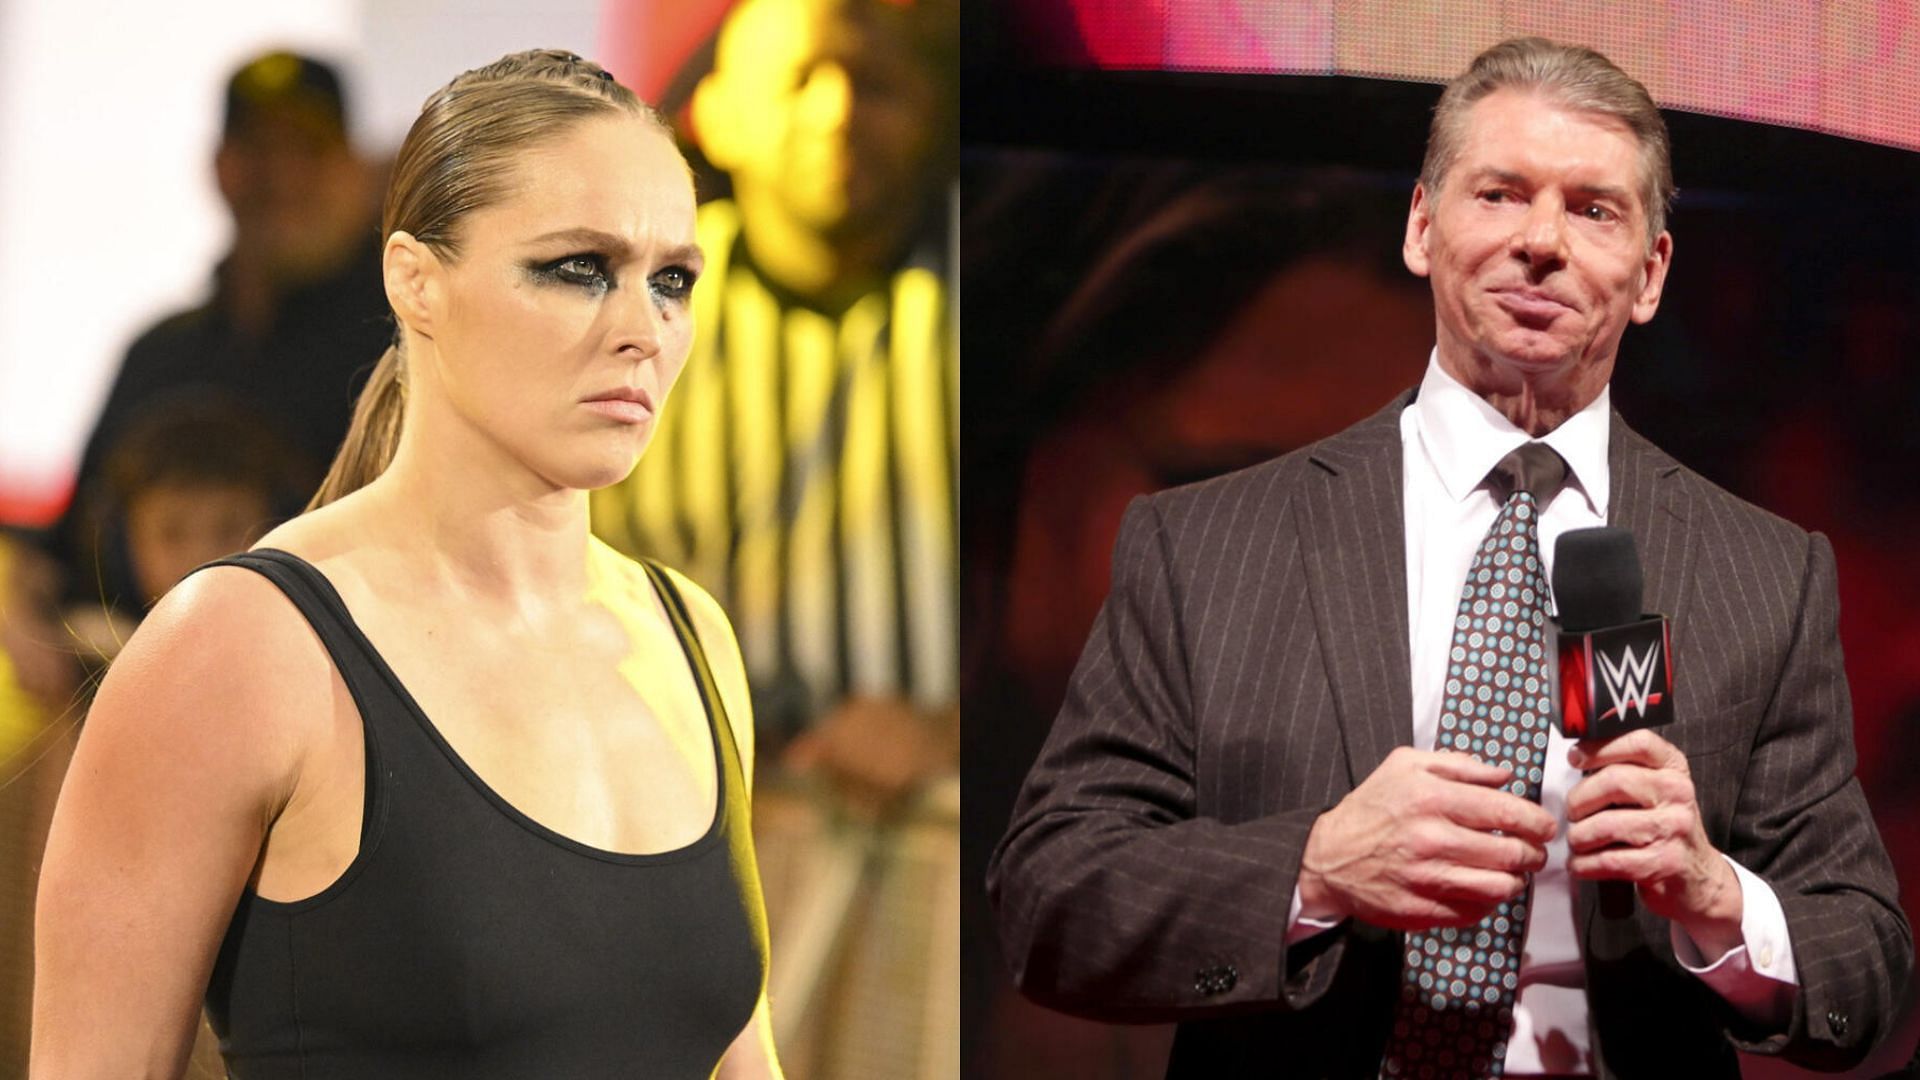 Ronda Rousey and Vince McMahon [Left to Right]!